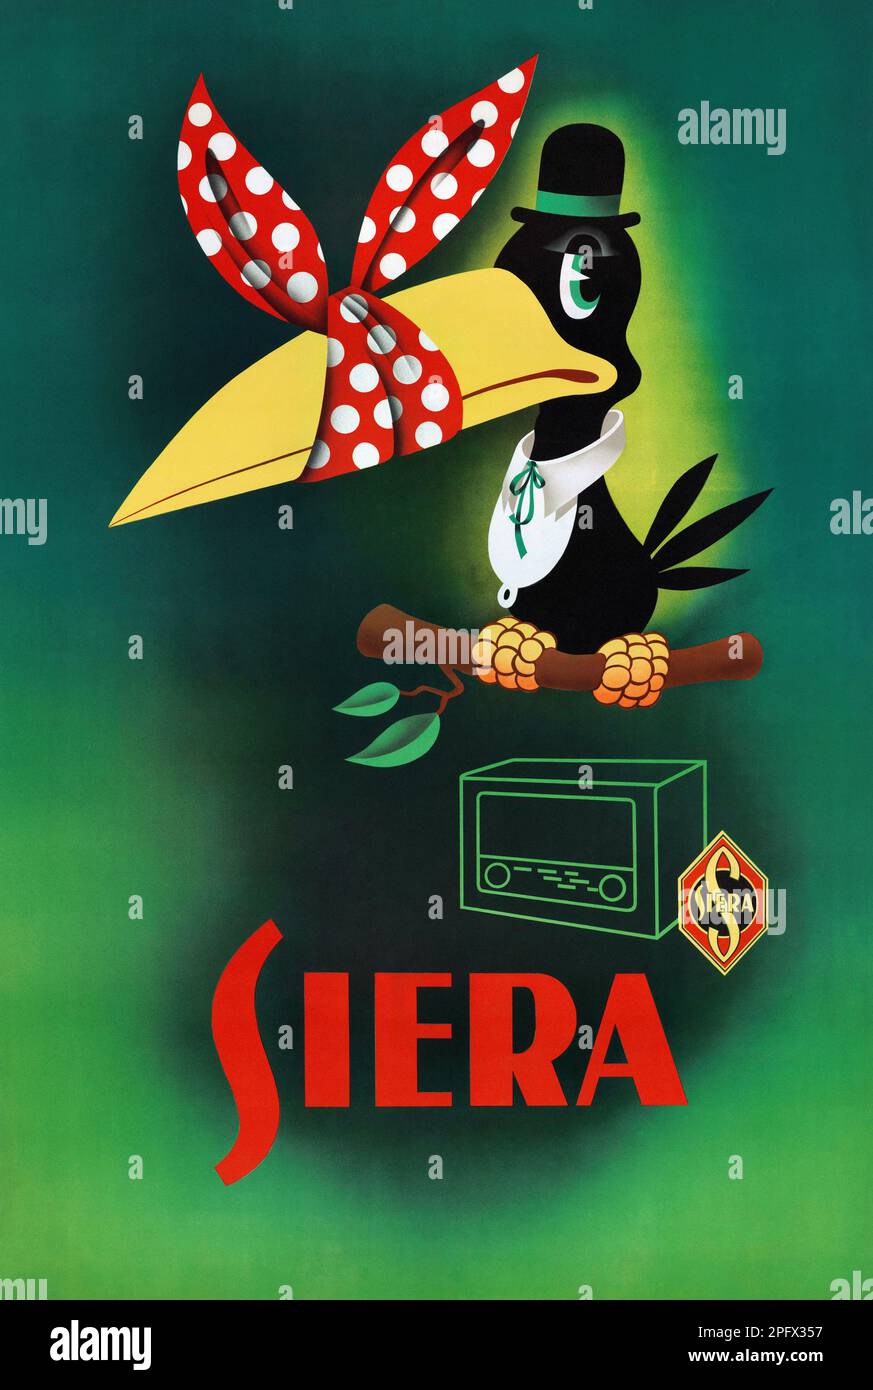 Siera. Artist unknown. Poster published ca. 1950s in Belgium. Stock Photo